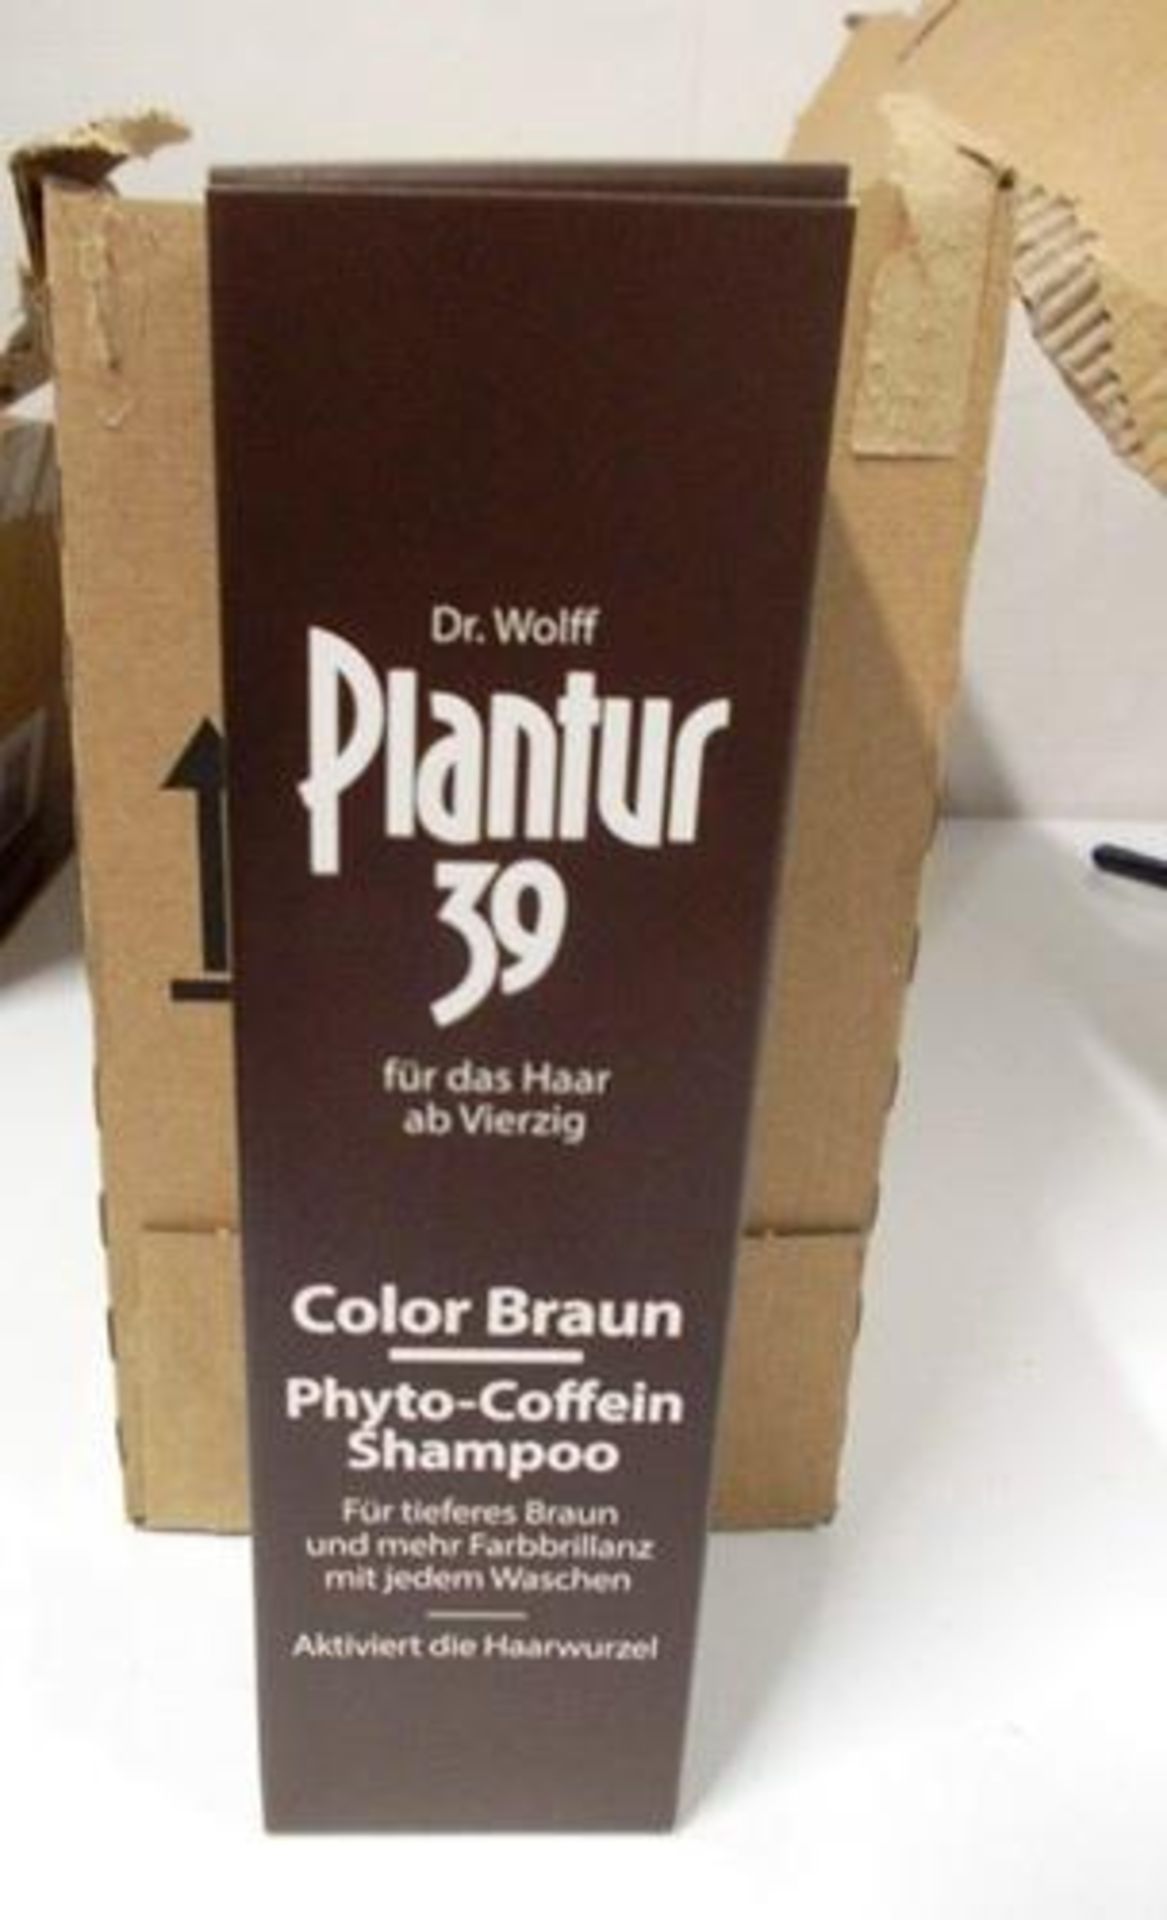 18 x 250ml boxes of Dr Wolf Phyto Caffeine Shampoo, expiry 12 months after opening - New in box (